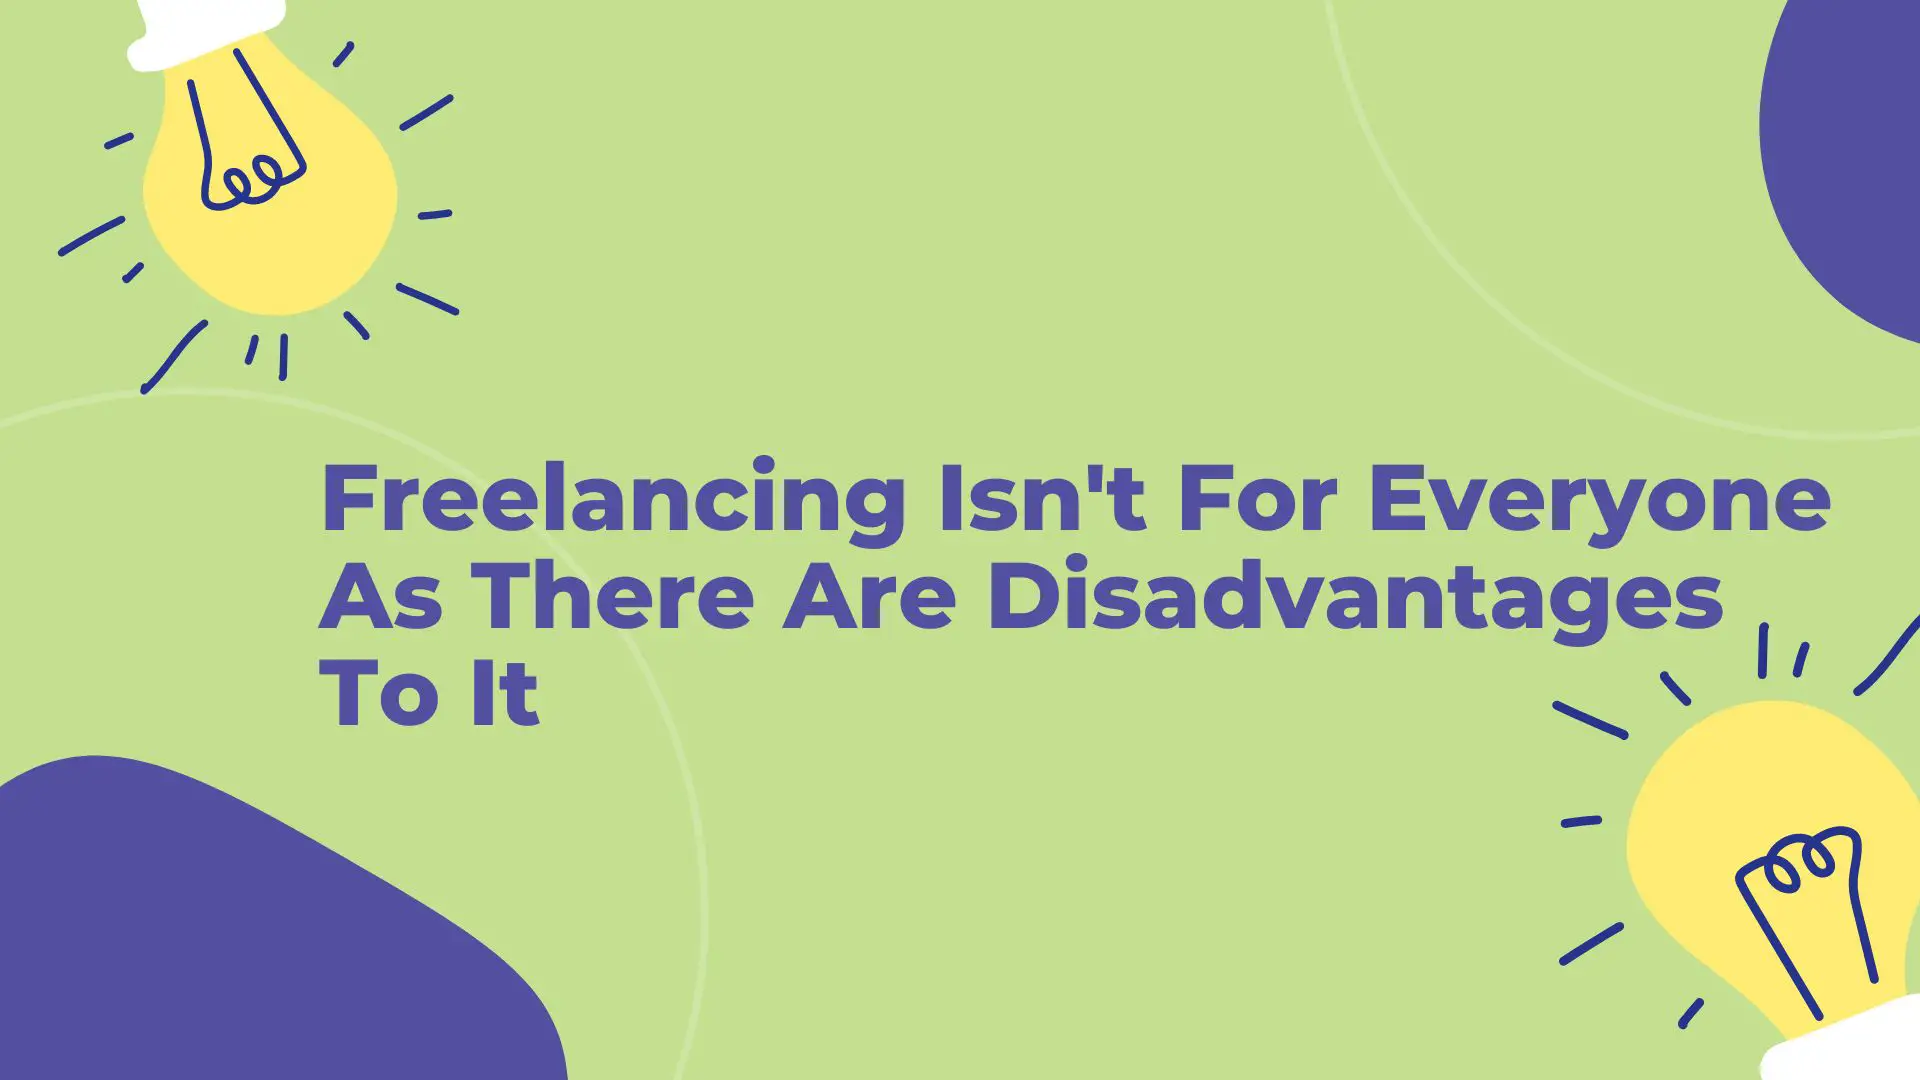 Freelancing Isn't For Everyone As There Are Disadvantages To It